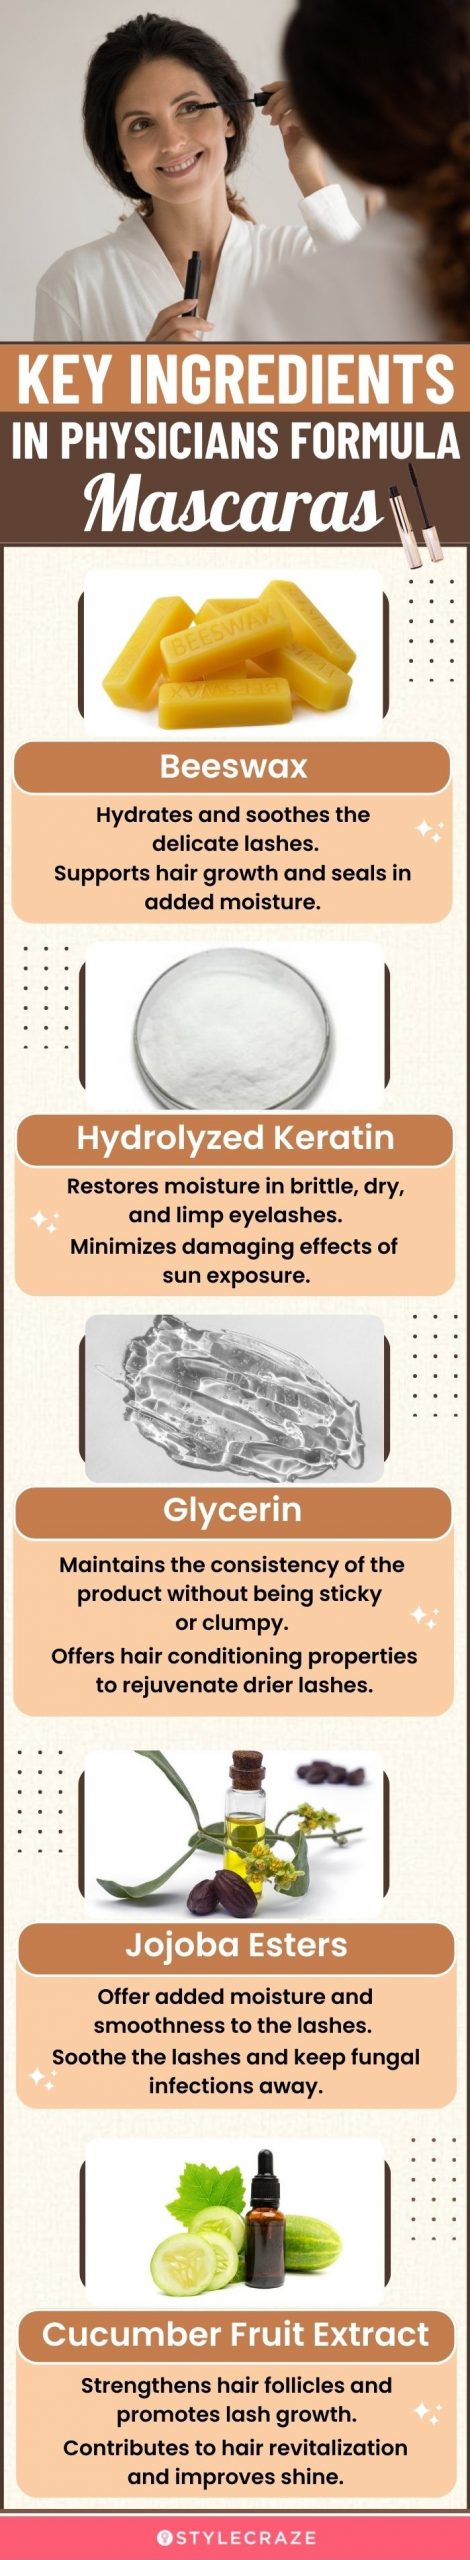 Key Ingredients Of Physicians Formula Mascaras (infographic)